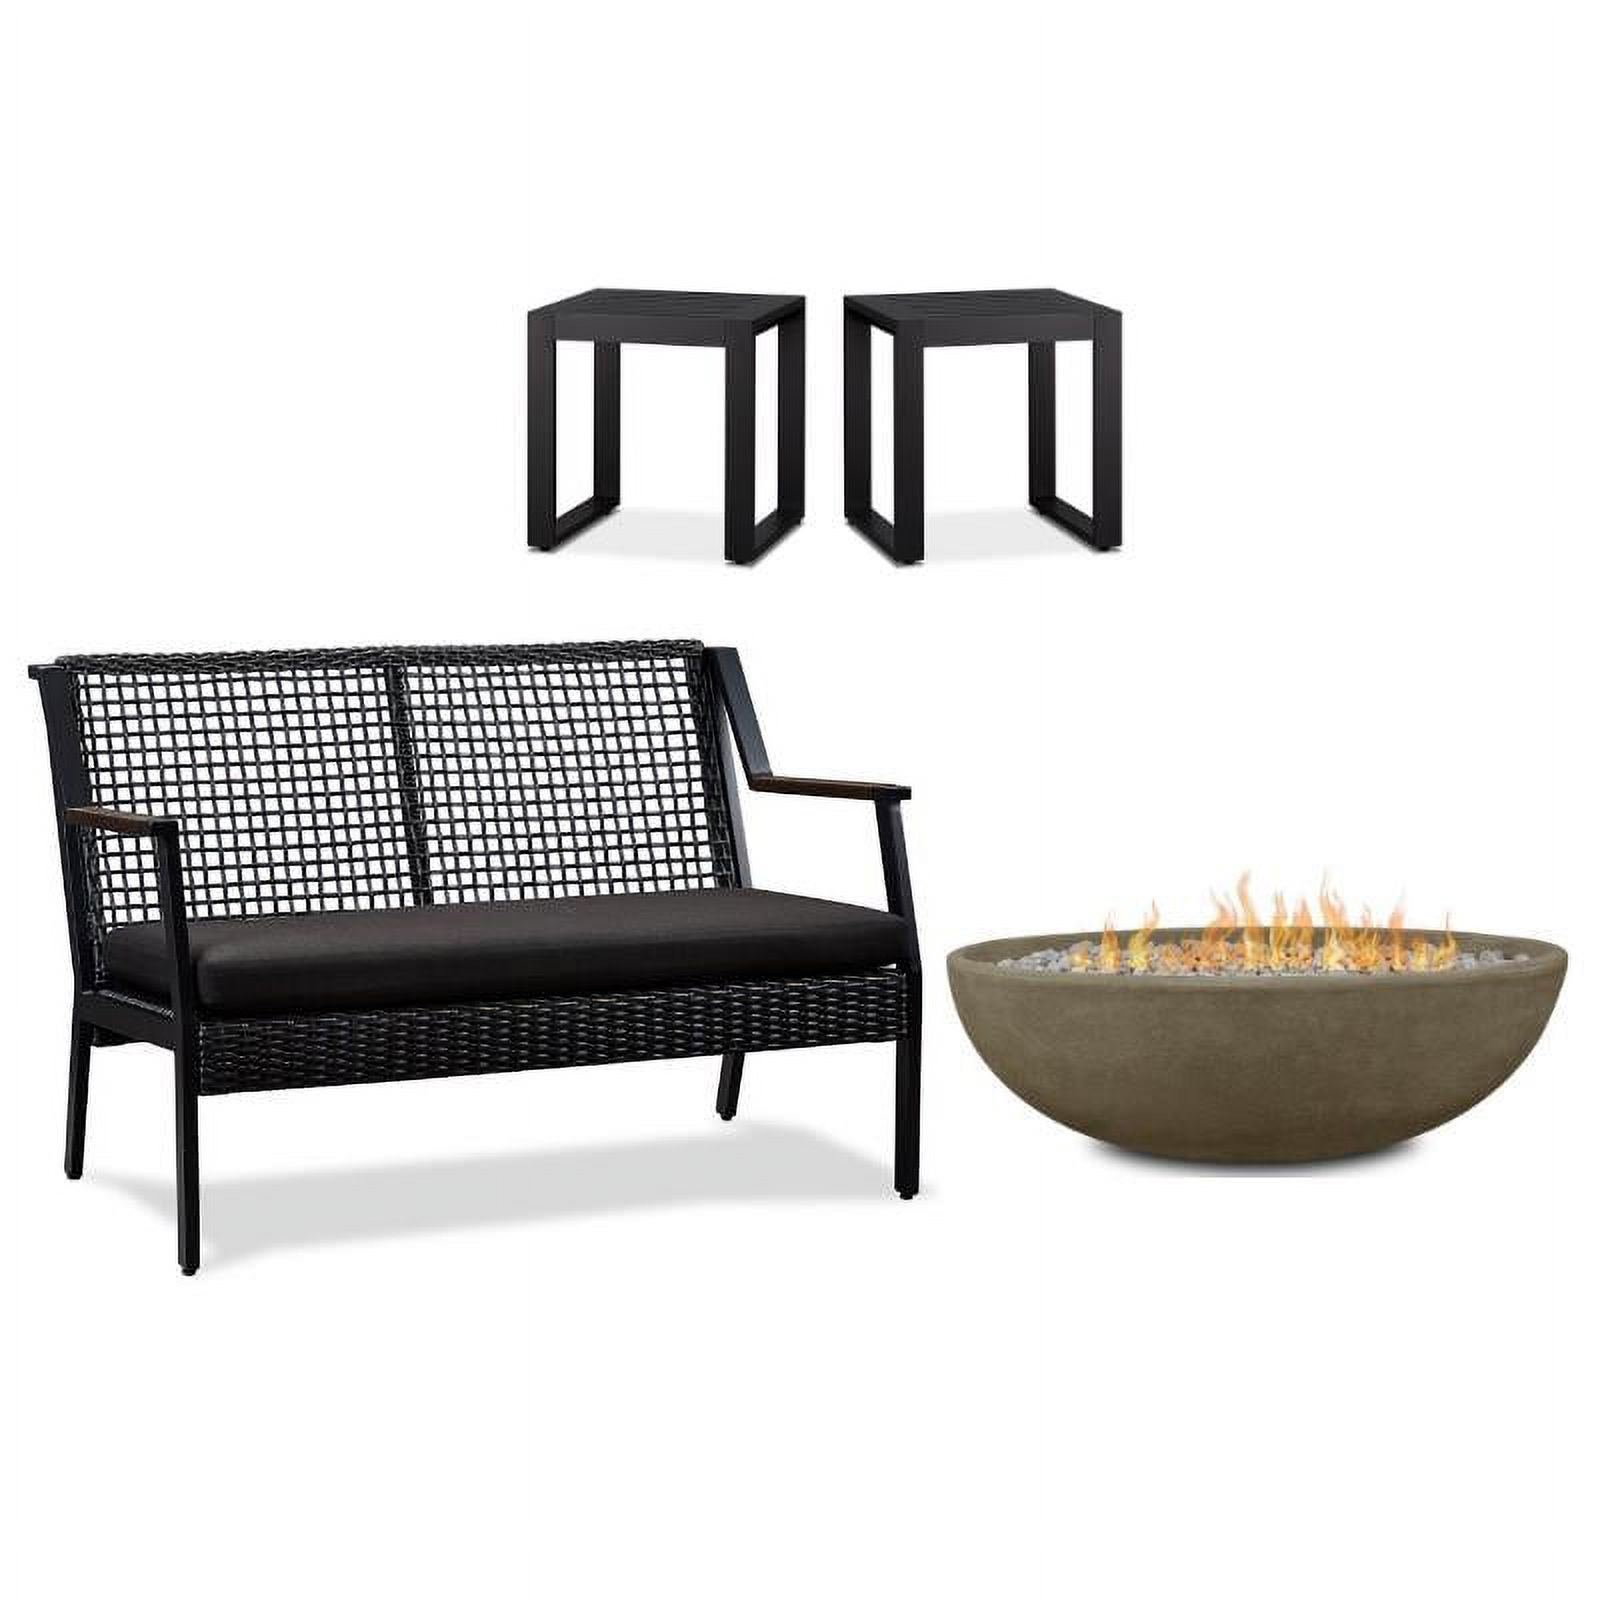 Home Square 3 Piece Set with Oval Fire Bowl Aluminum Patio Loveseat & End Table - image 1 of 19